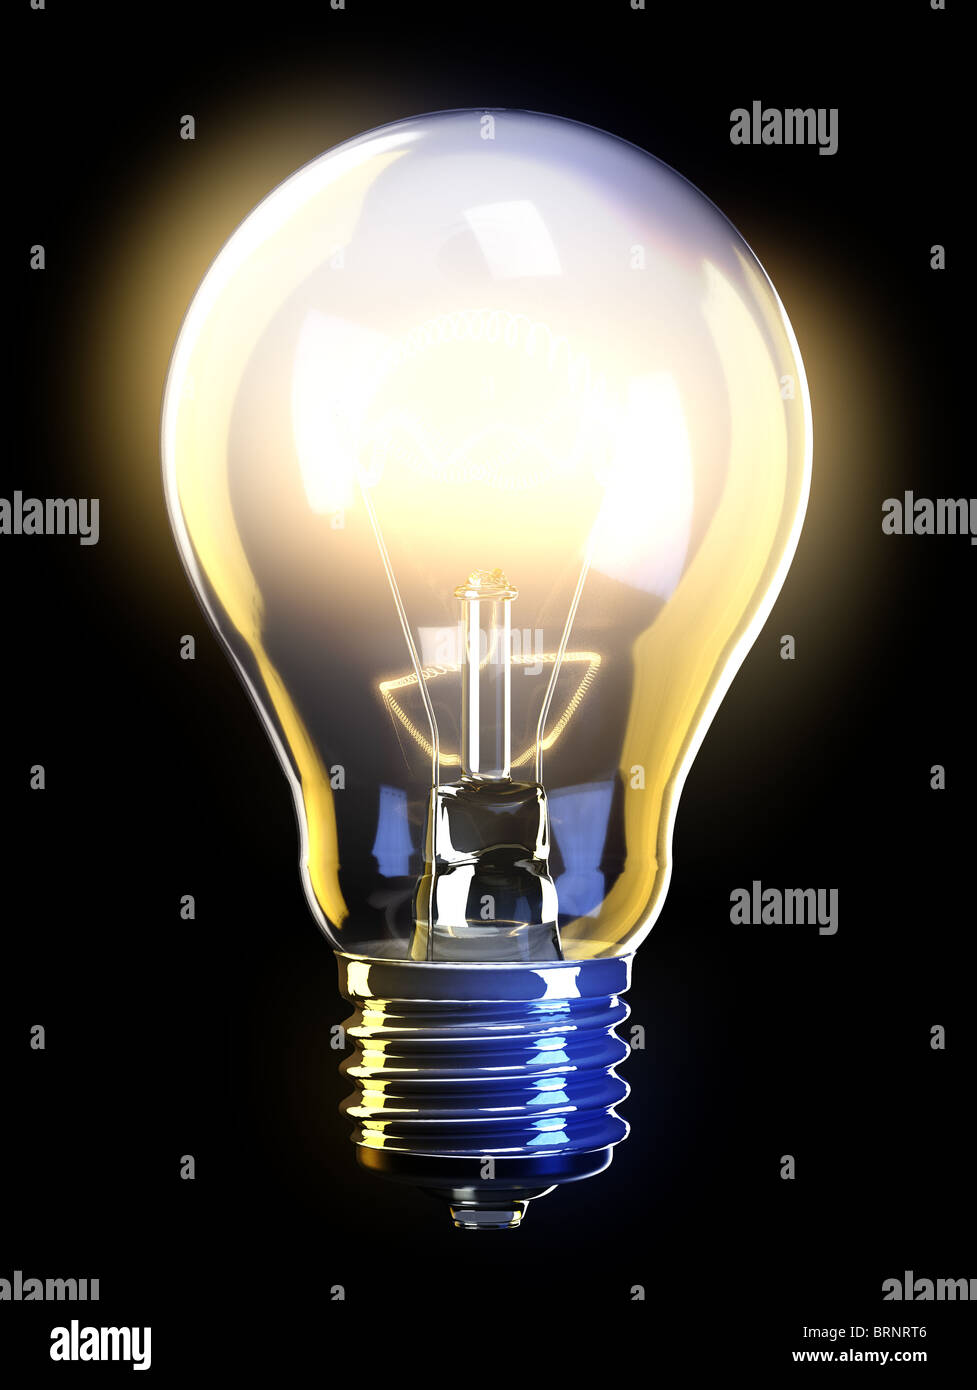 Glowing light bulb with detailed filament and inner glass body. Stock Photo